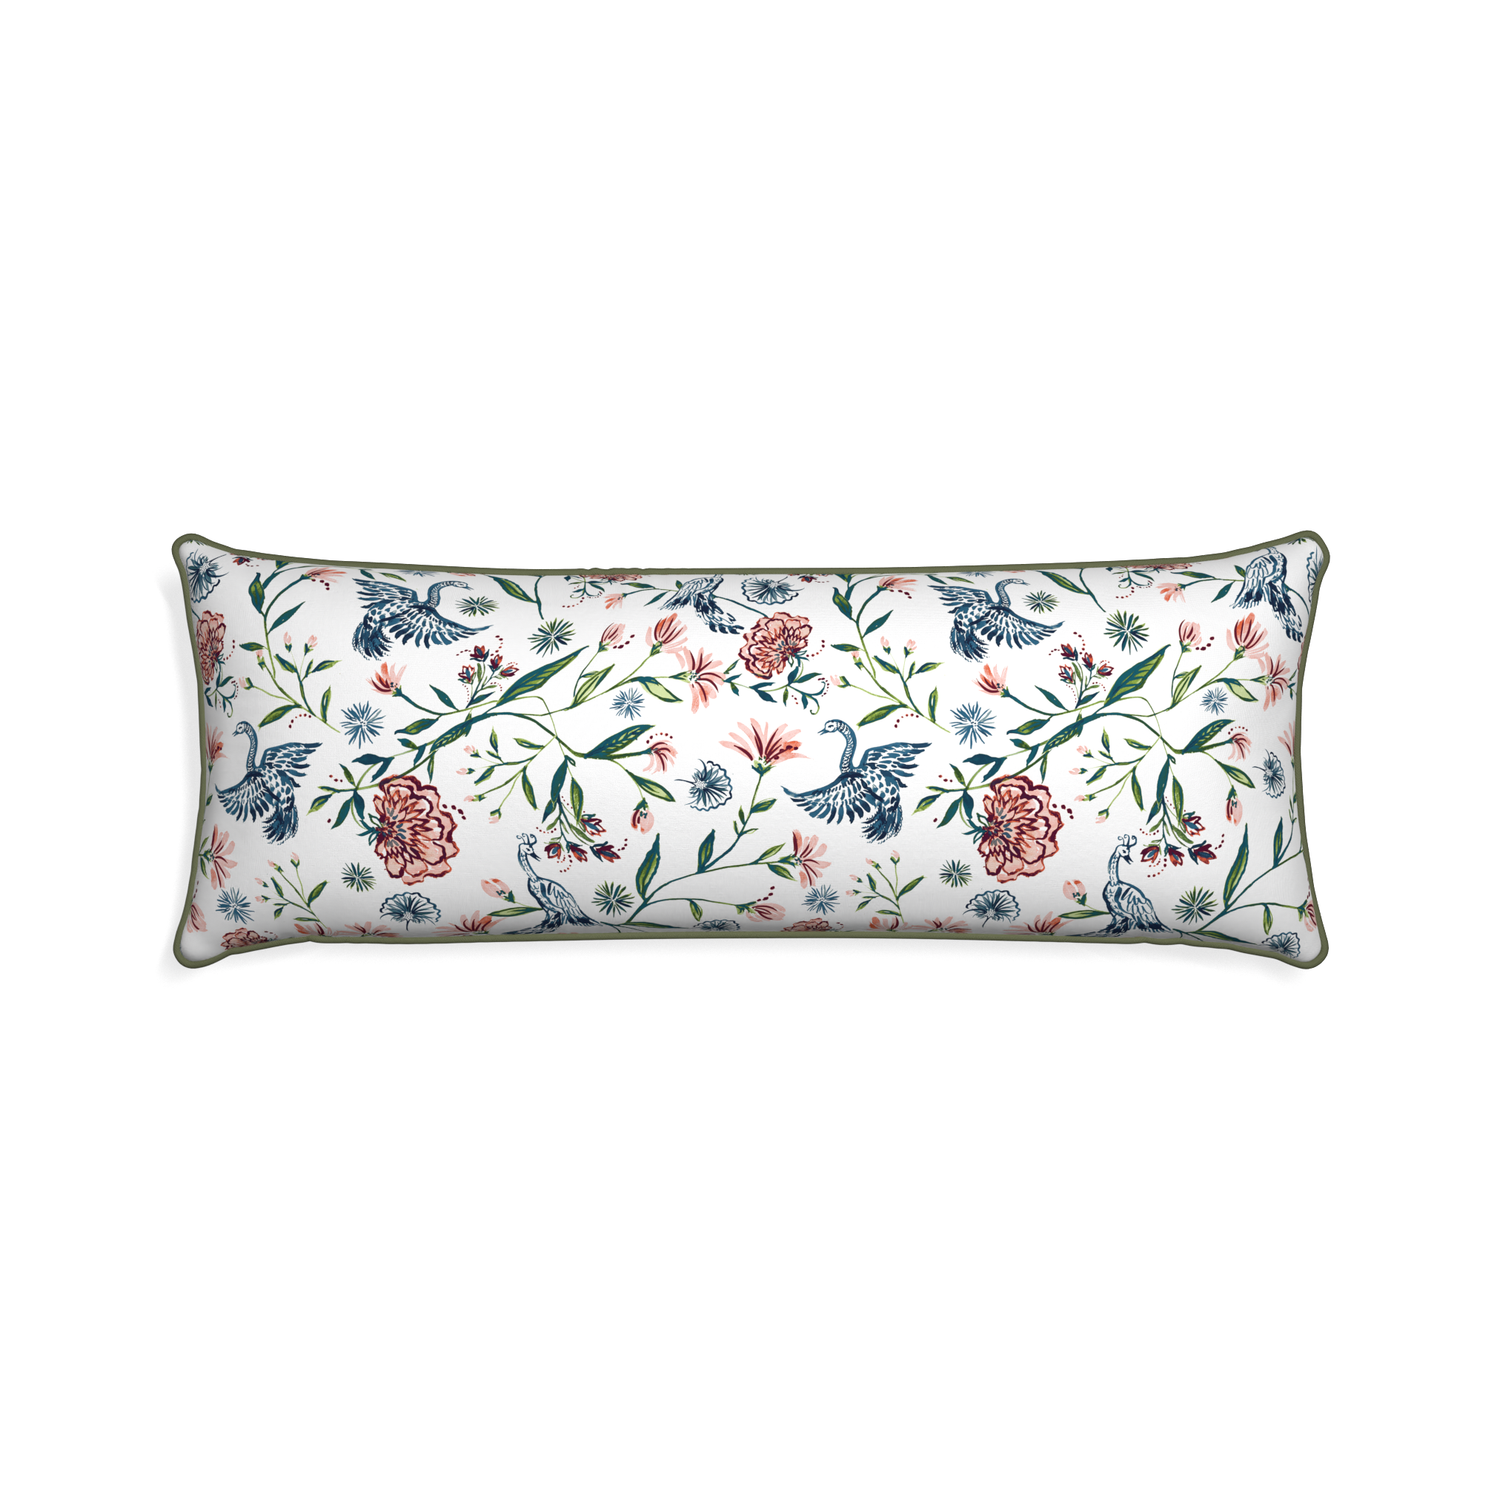 Xl-lumbar daphne cream custom pillow with f piping on white background